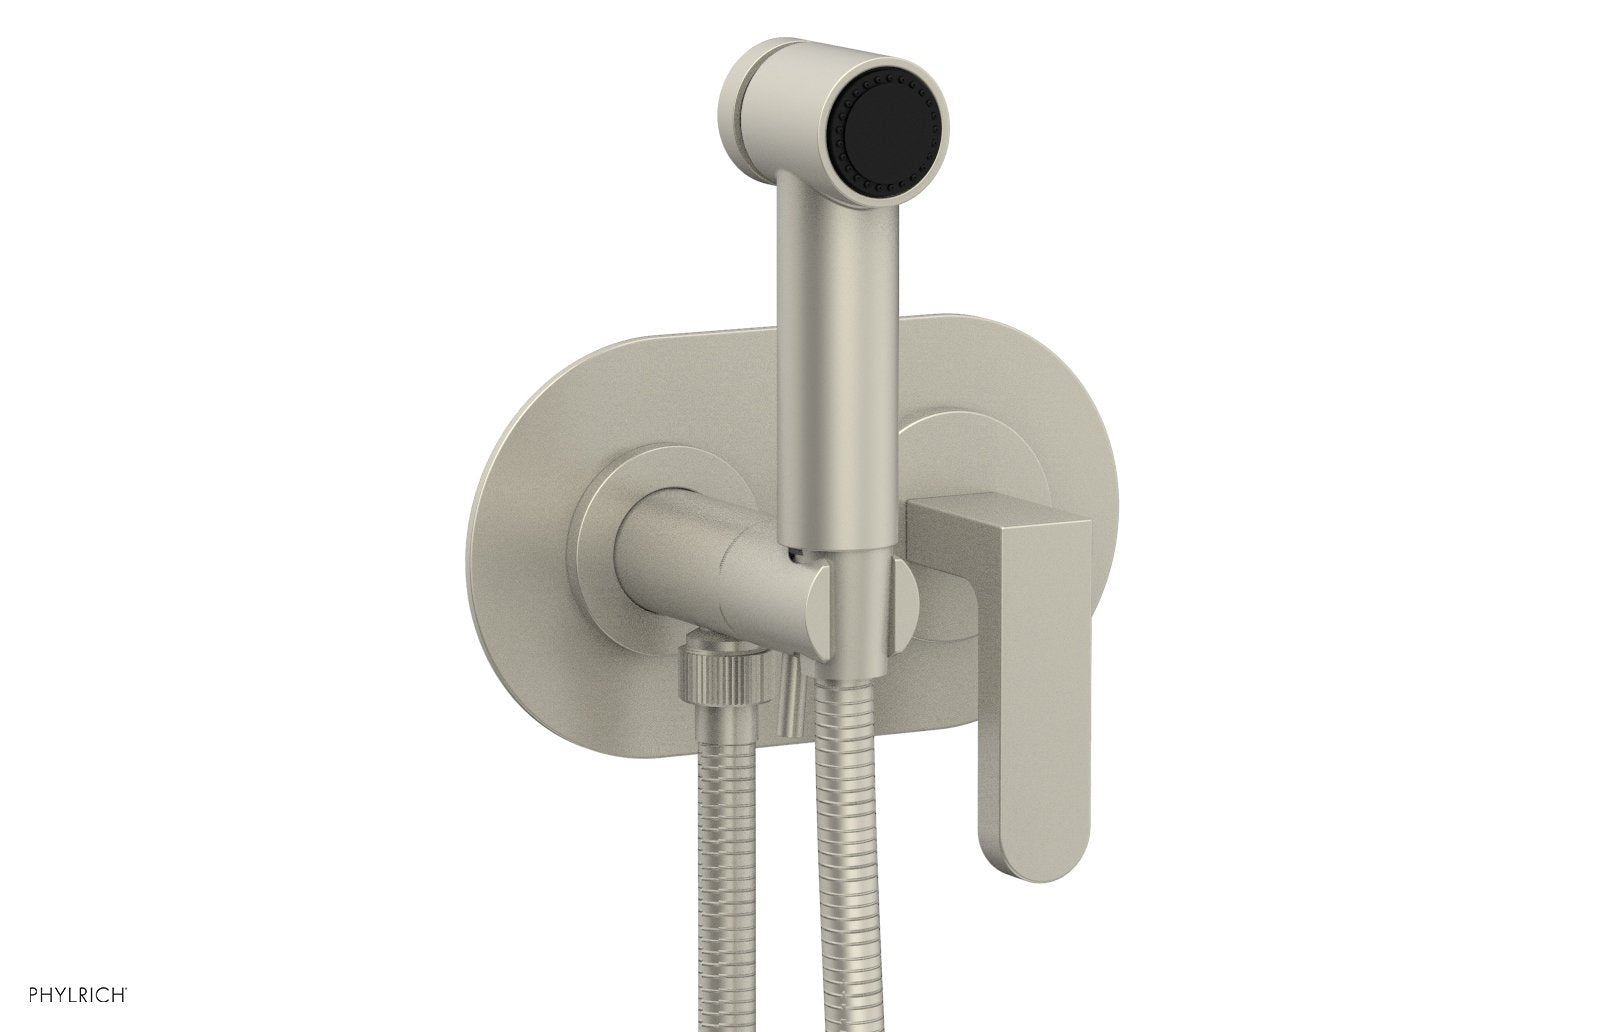 Phylrich ROND Wall Mounted Bidet, Lever Handle